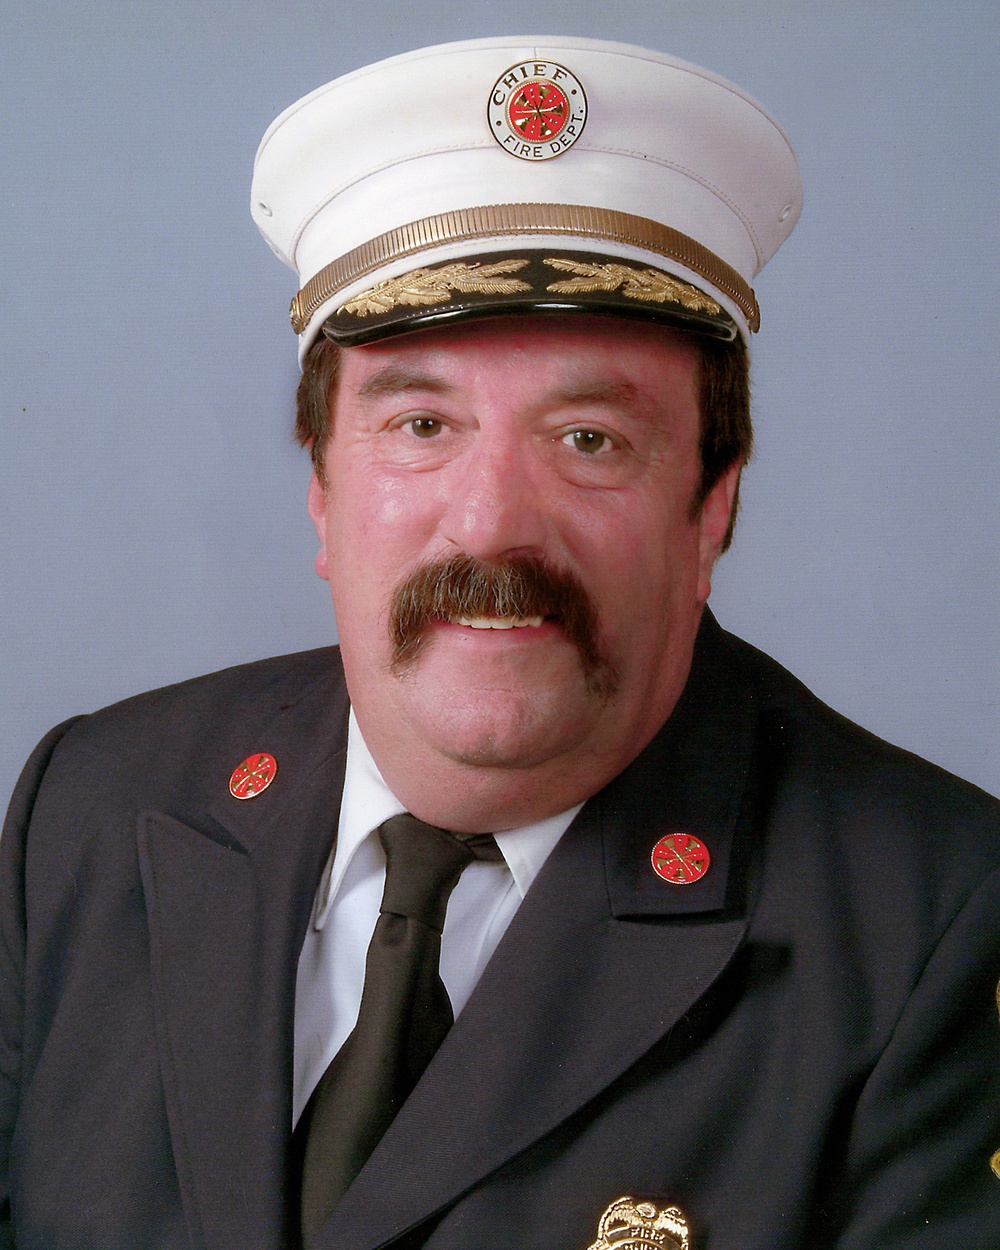 Connecticut hero always remembered, inducted into Navy Fire Fighter Hall of Fame